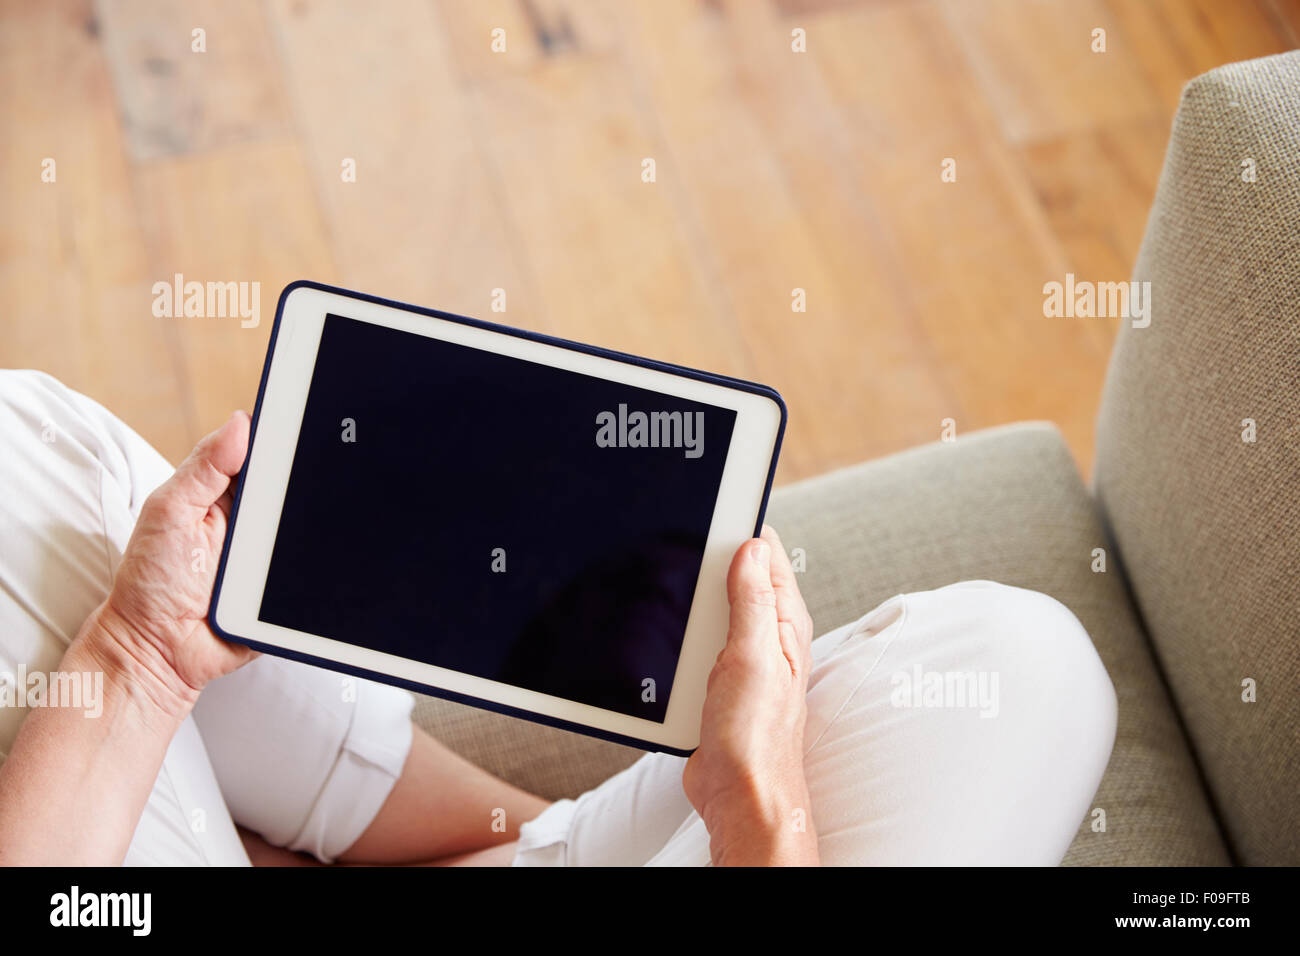 Close Up Of Woman Using Digital Tablet At Home Stock Photo